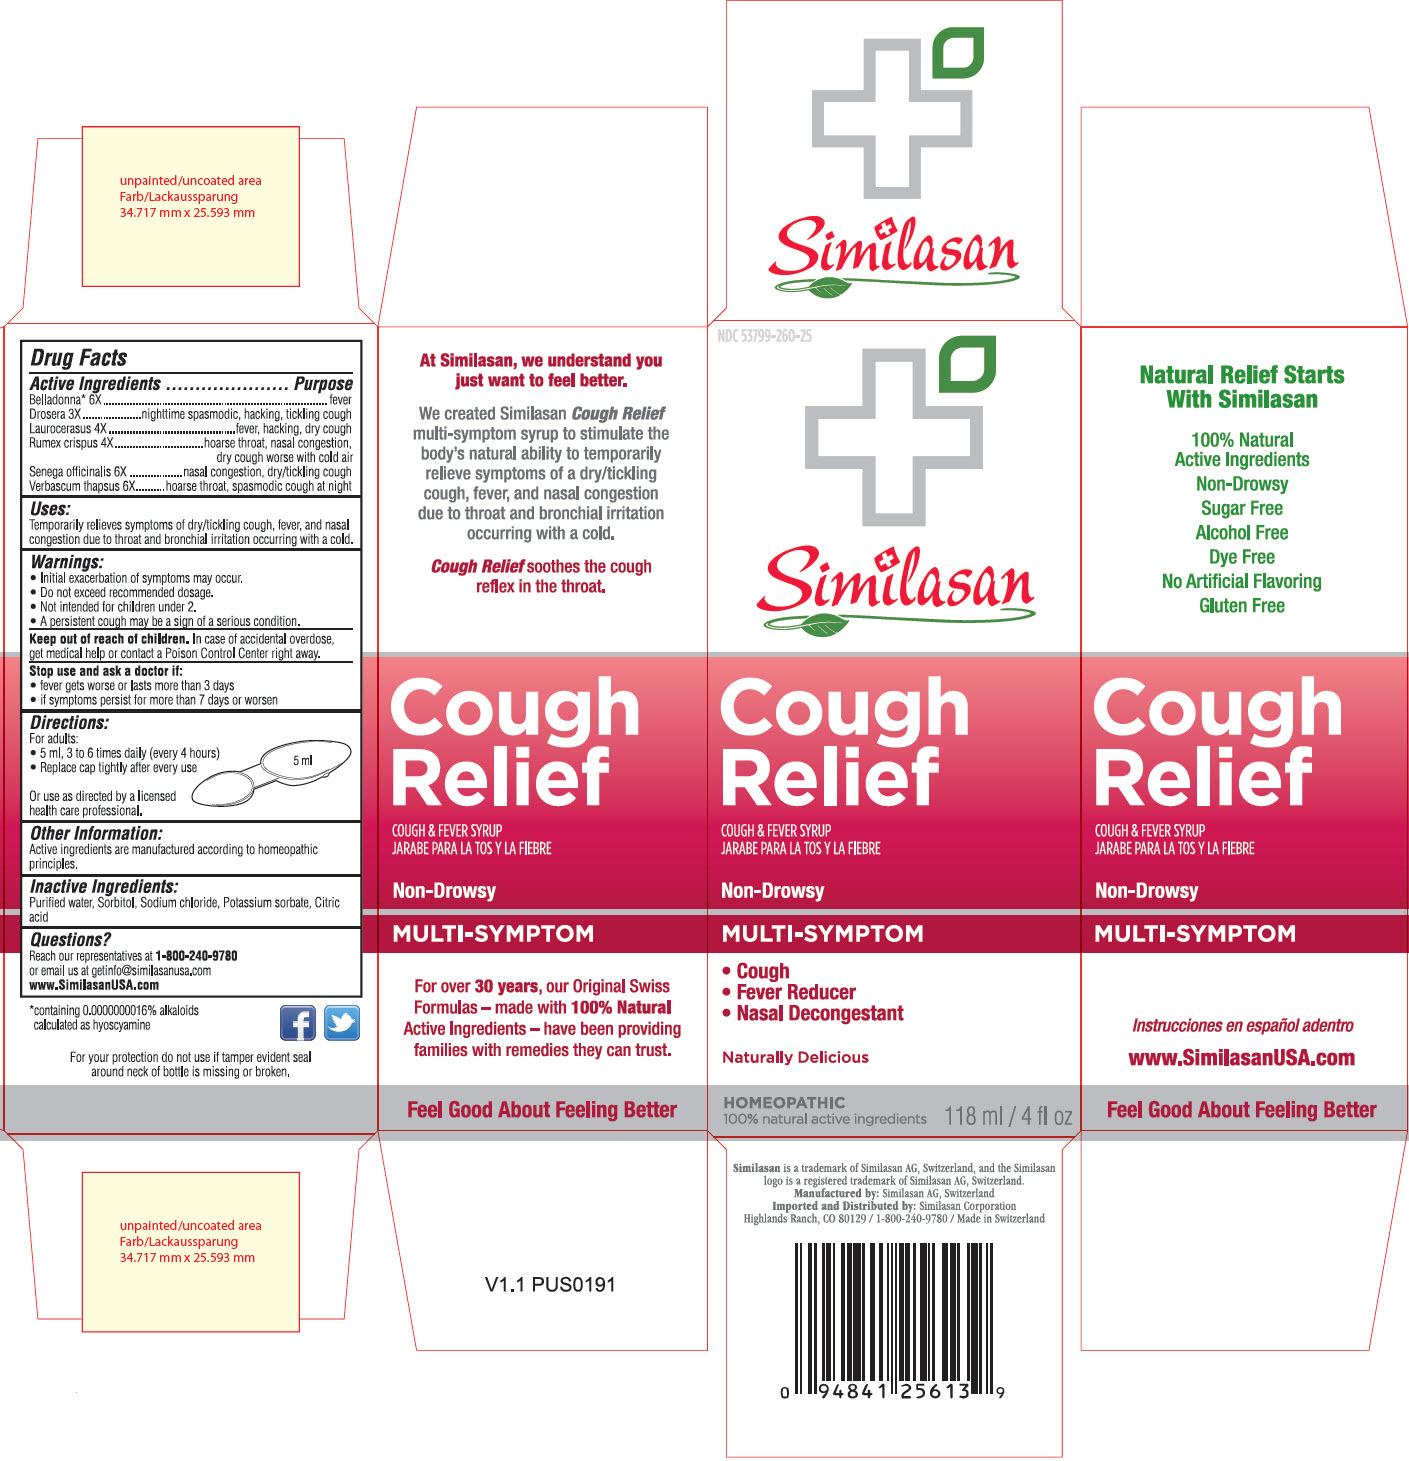 NDC 53799-260-25 Similasan Cough Relief COUGH & FEVER SYRUP JARABE PARA LA TOS Y LA FIEBRE Non-Drowsy MULTI-SYMPTOM •Cough •Fever Reducer •Nasal Decongestant Naturally Delicious HOMEOPATHIC 100% natural active ingredients 118 ml / 4 fl oz